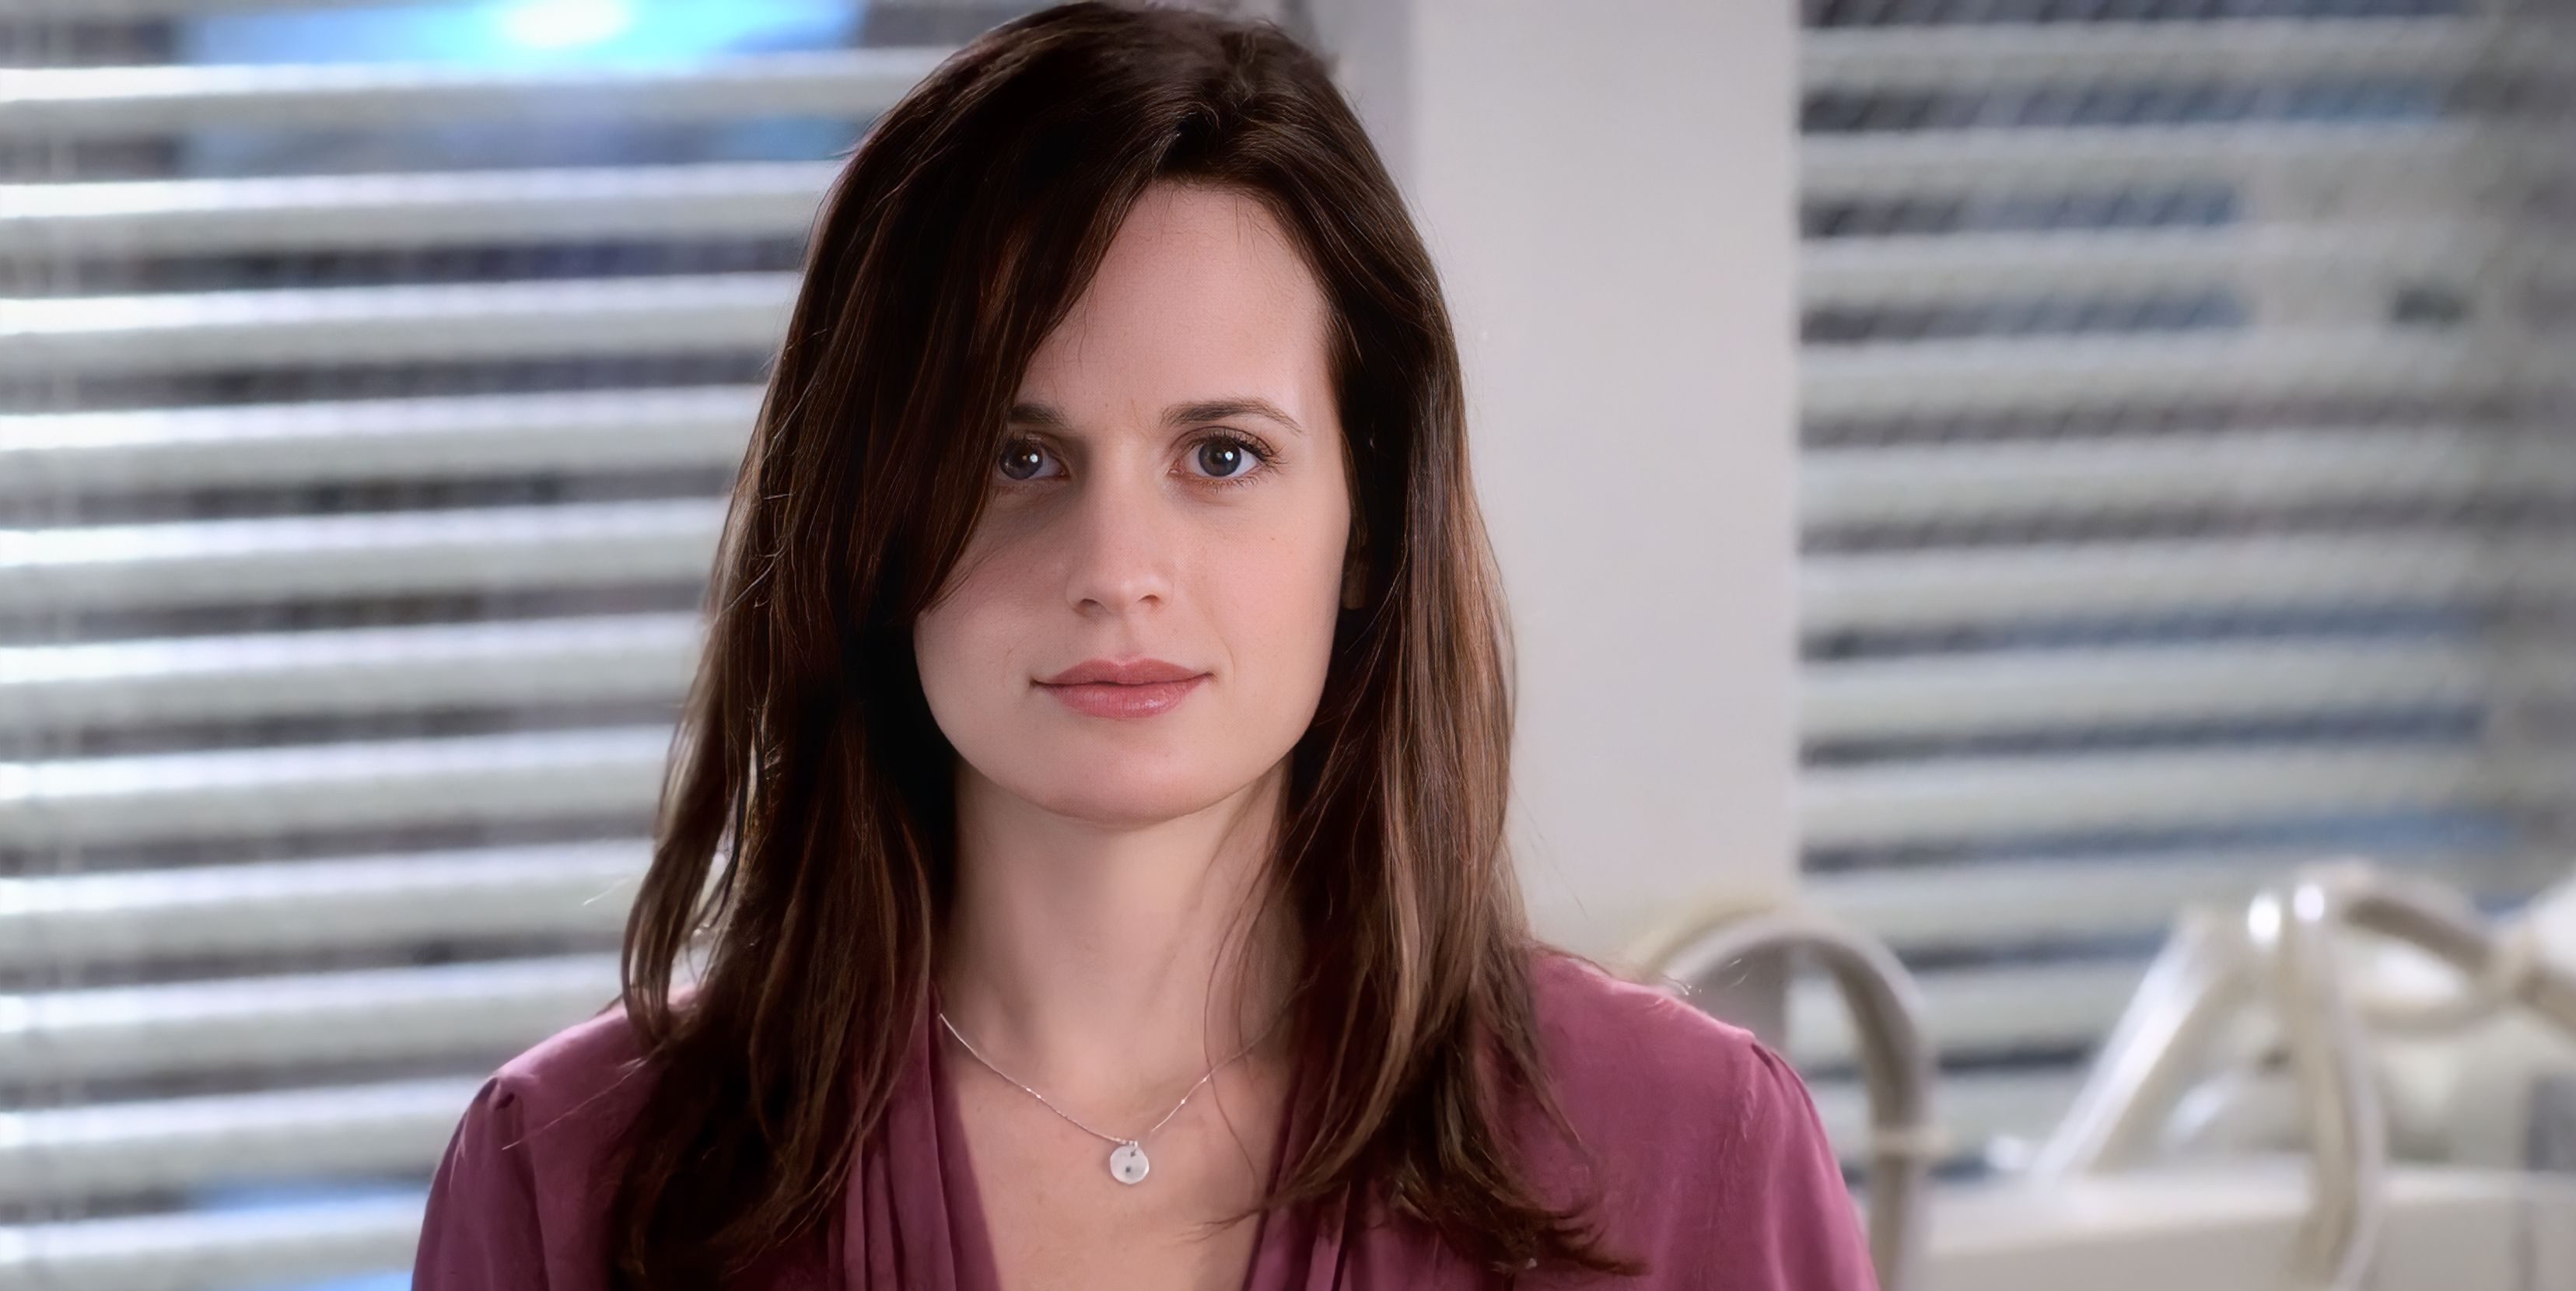 What Happened to Ava? Why Did Elizabeth Reaser Leave Grey’s Anatomy?